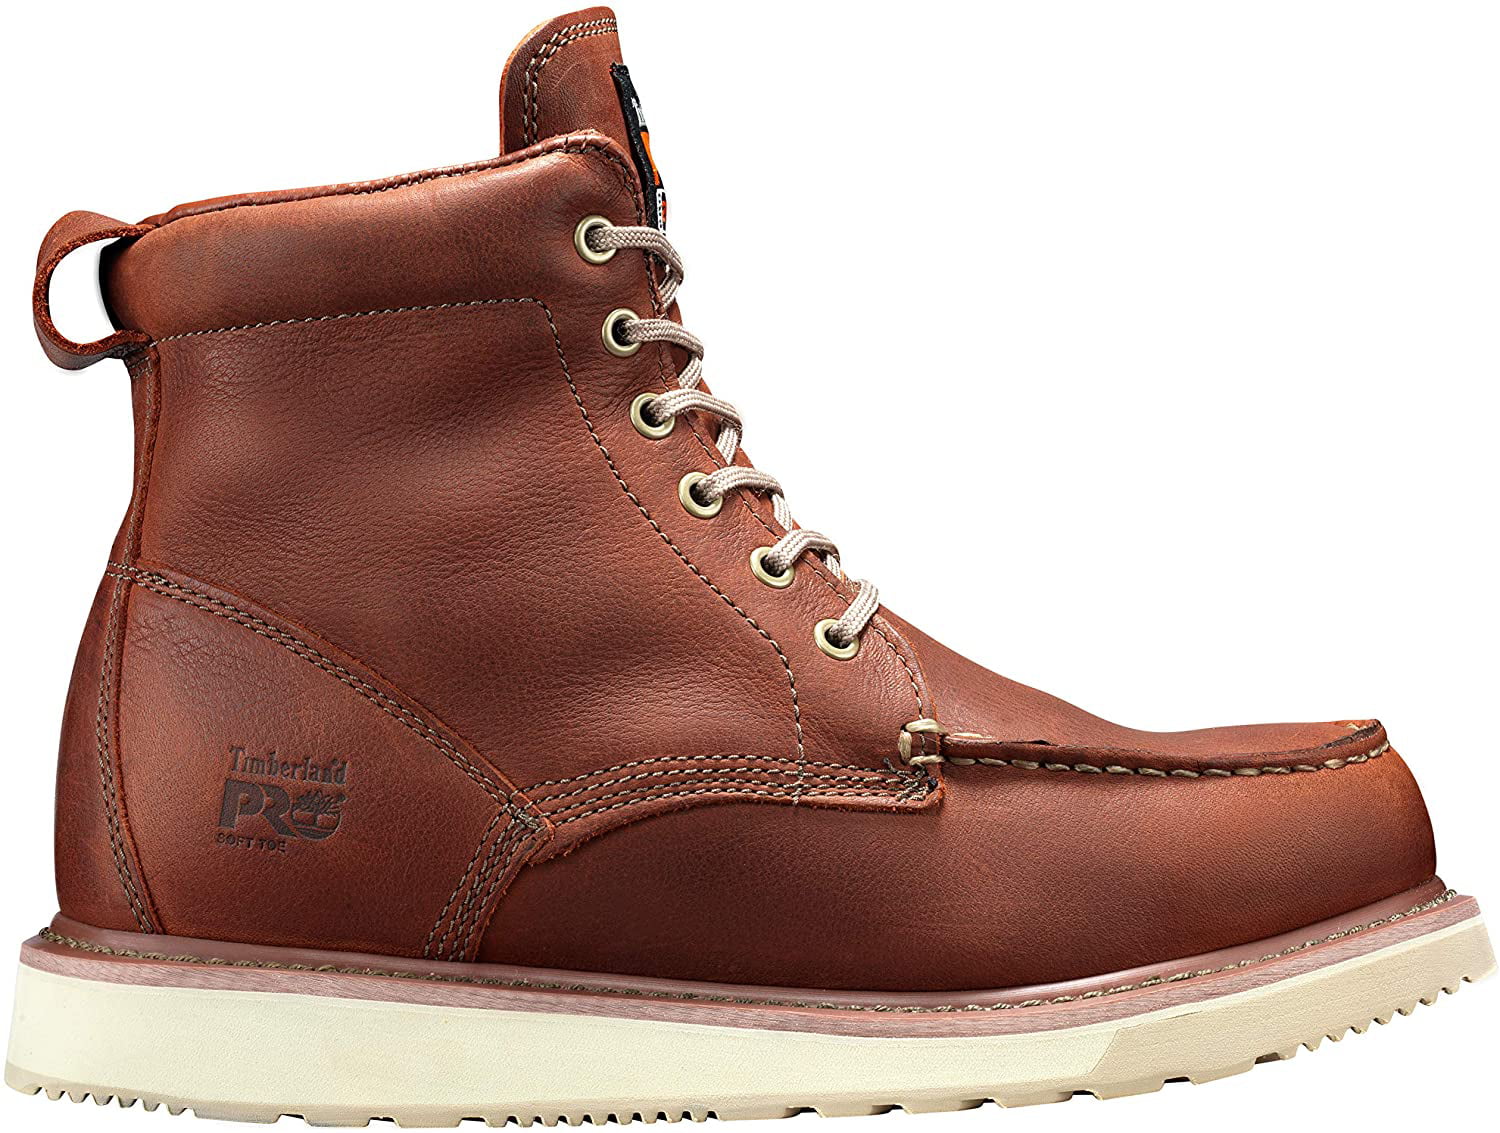 Save 31% Mens Shoes Boots Chukka boots and desert boots Timberland 53009 Wedge Sole 6 Soft-toe Boot,rust,8.5 W in Brown for Men 